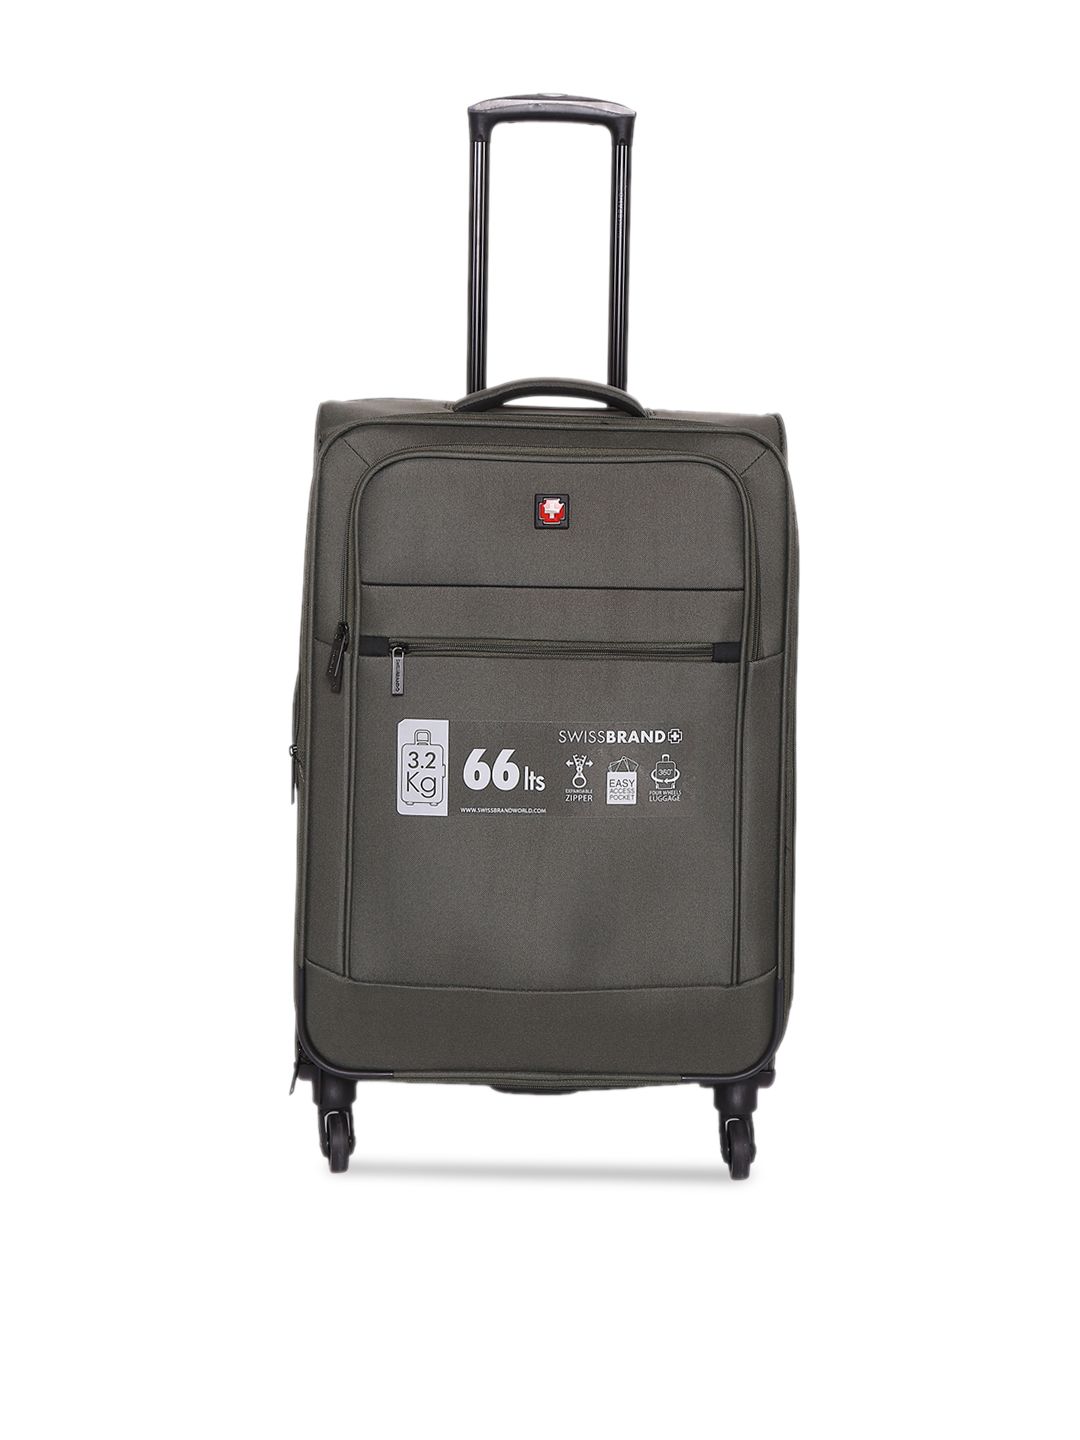 SWISS BRAND Olive Green Solid Barcelona Soft-Sided Cabin Trolley Bag Price in India